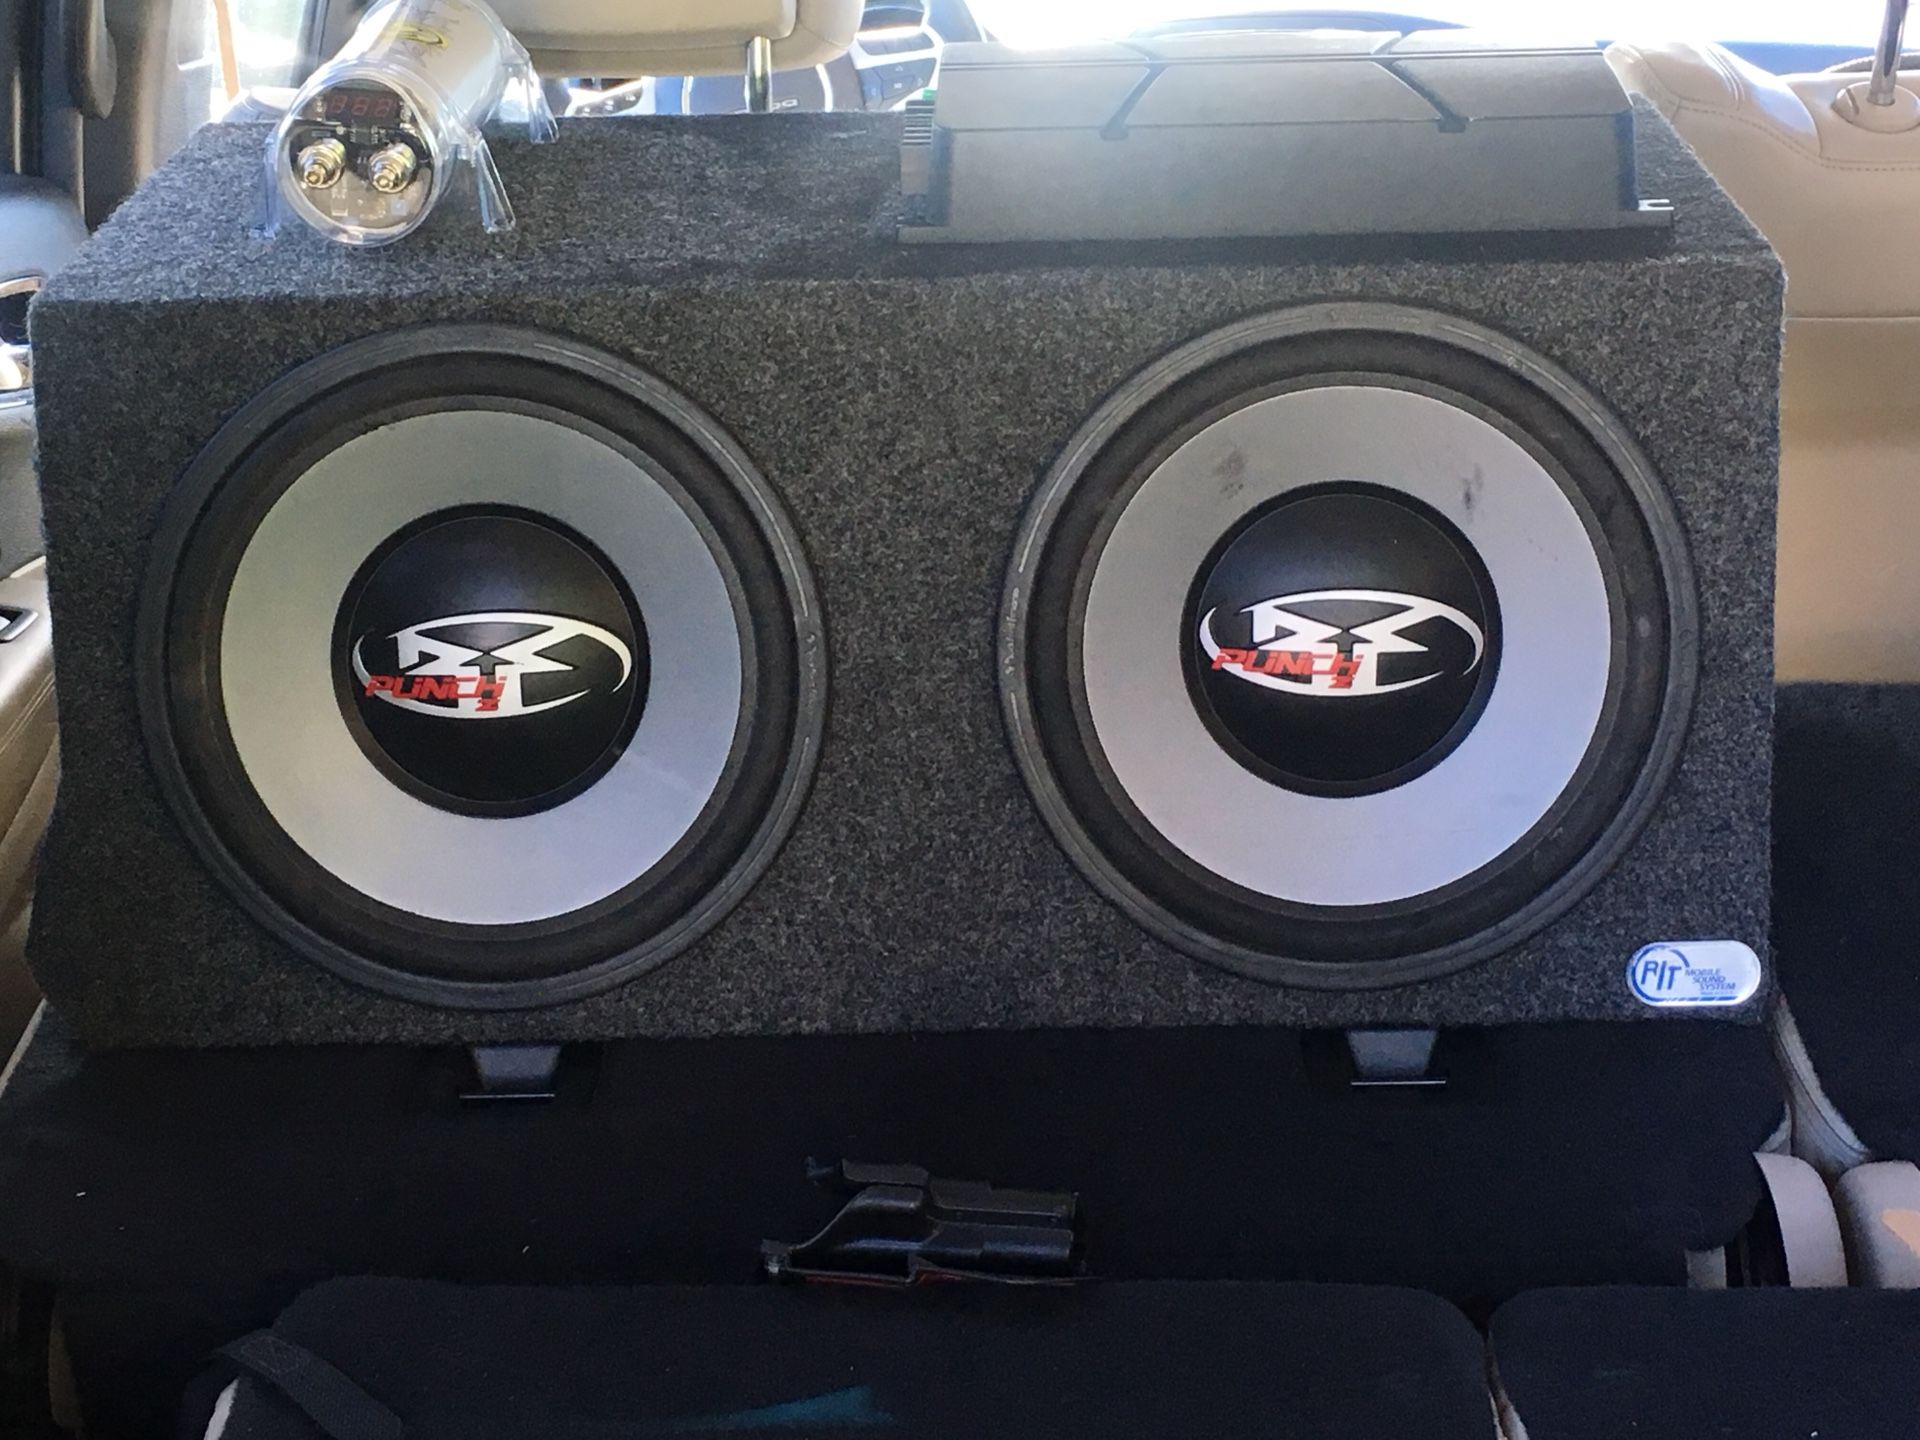 2 Rockford Fosgate 12" Subs with box, pioneer amplifier with bass boost, and 2 Farad capacitor.